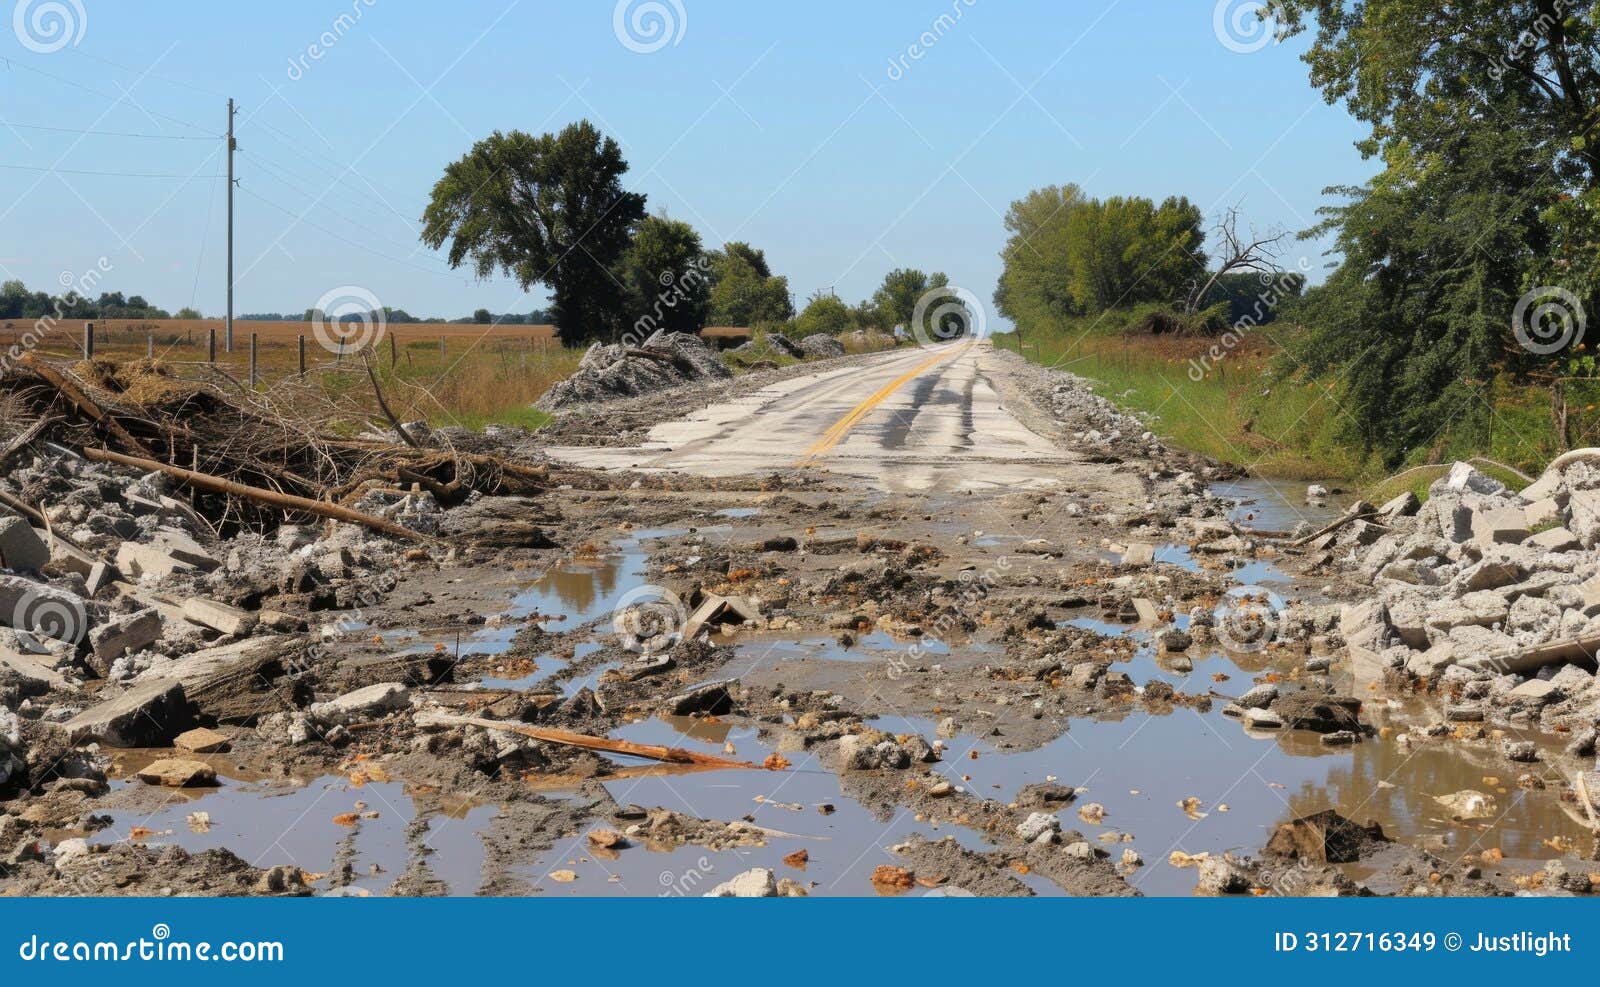 haphazard piles of rubble line the sides of a nowimpassable road evidence of the intense flooding that swept through the